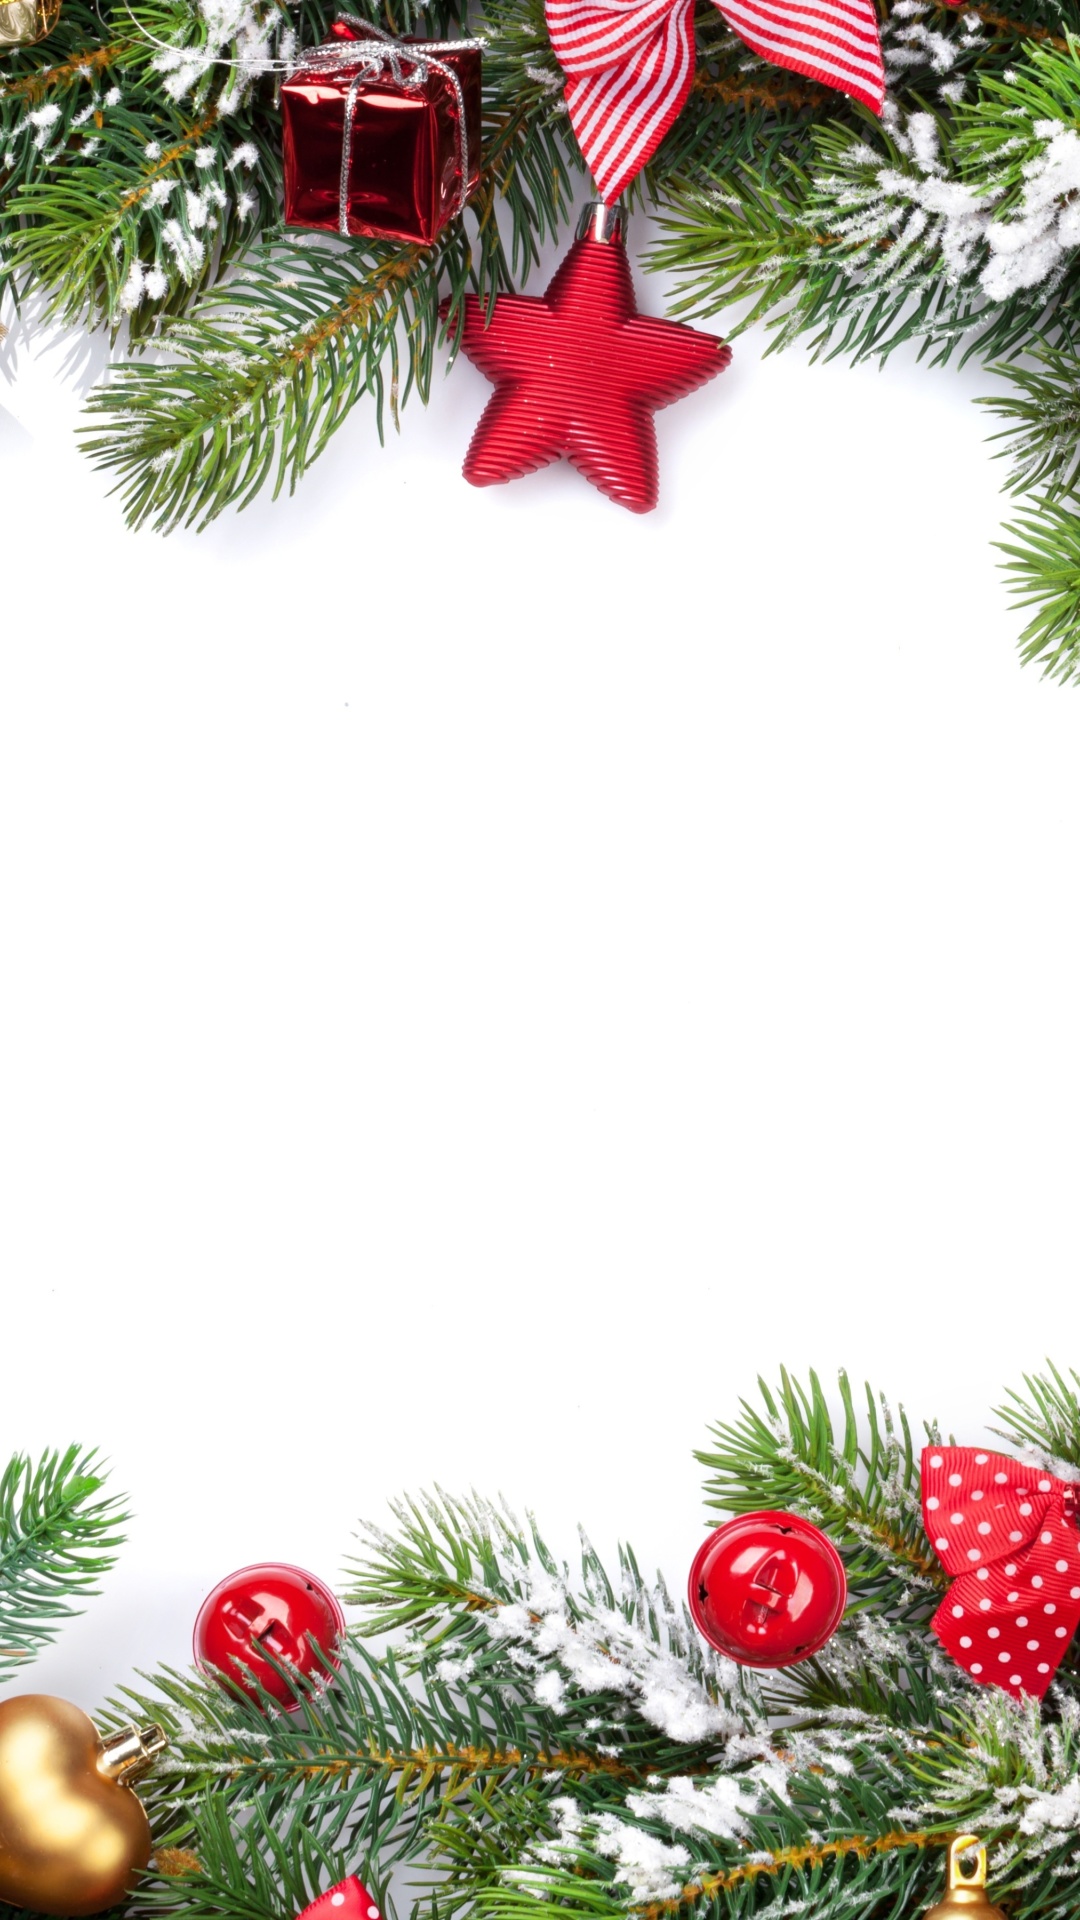 Festival decorate a christmas tree wallpaper 1080x1920